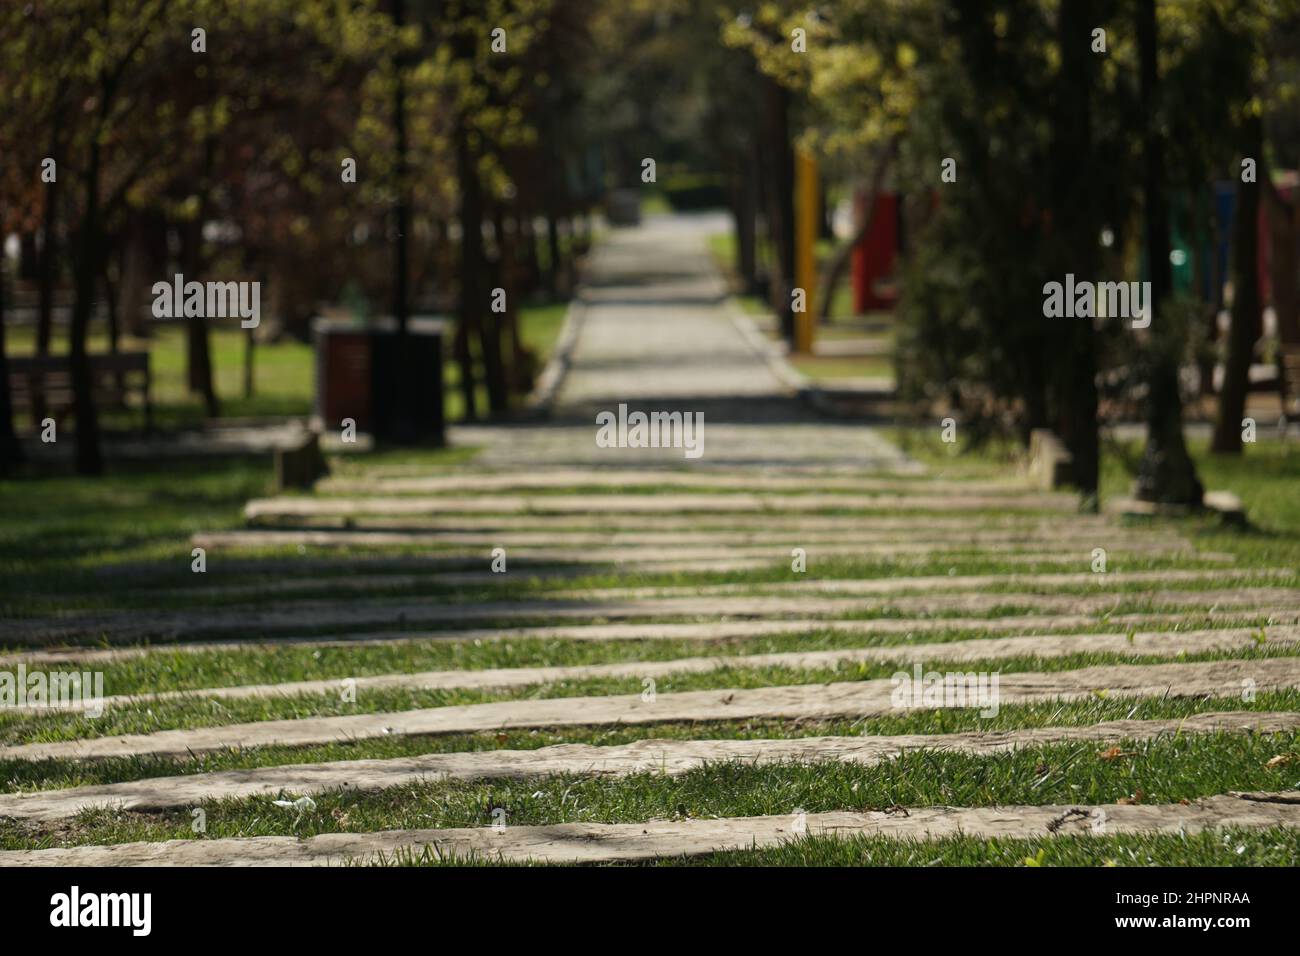 At spring Tulips and flowers Emirgan park Istanbul Stock Photo